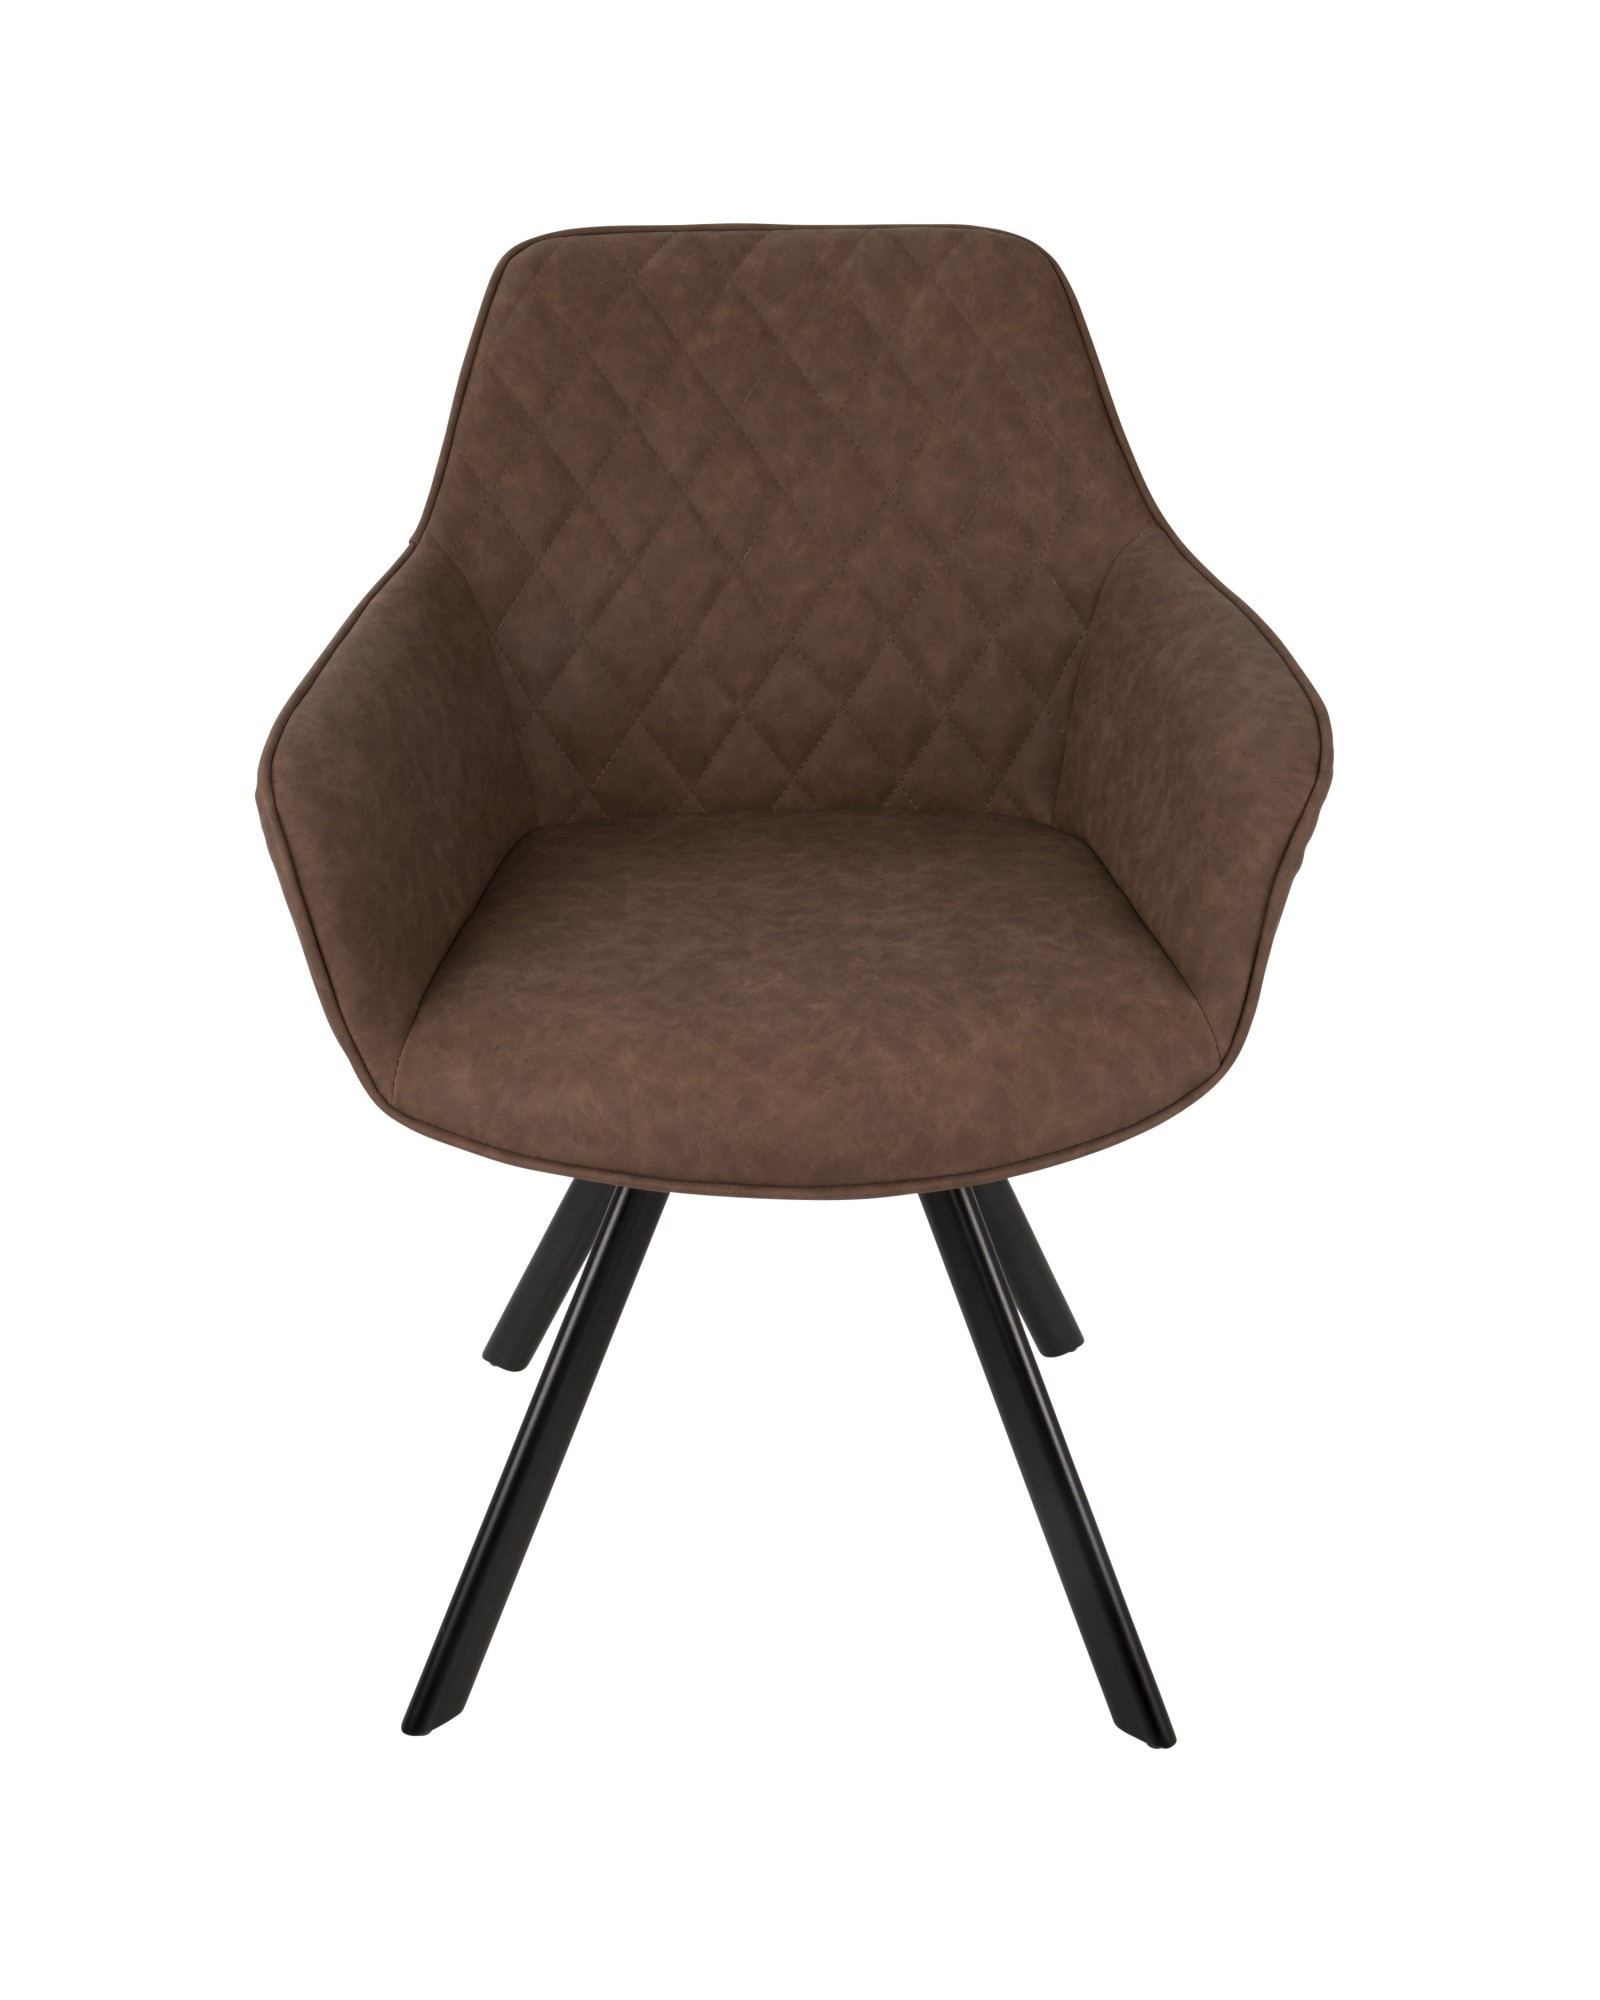 Outlaw Industrial Dining/Accent Chair in Brown Faux Leather - Set of 2